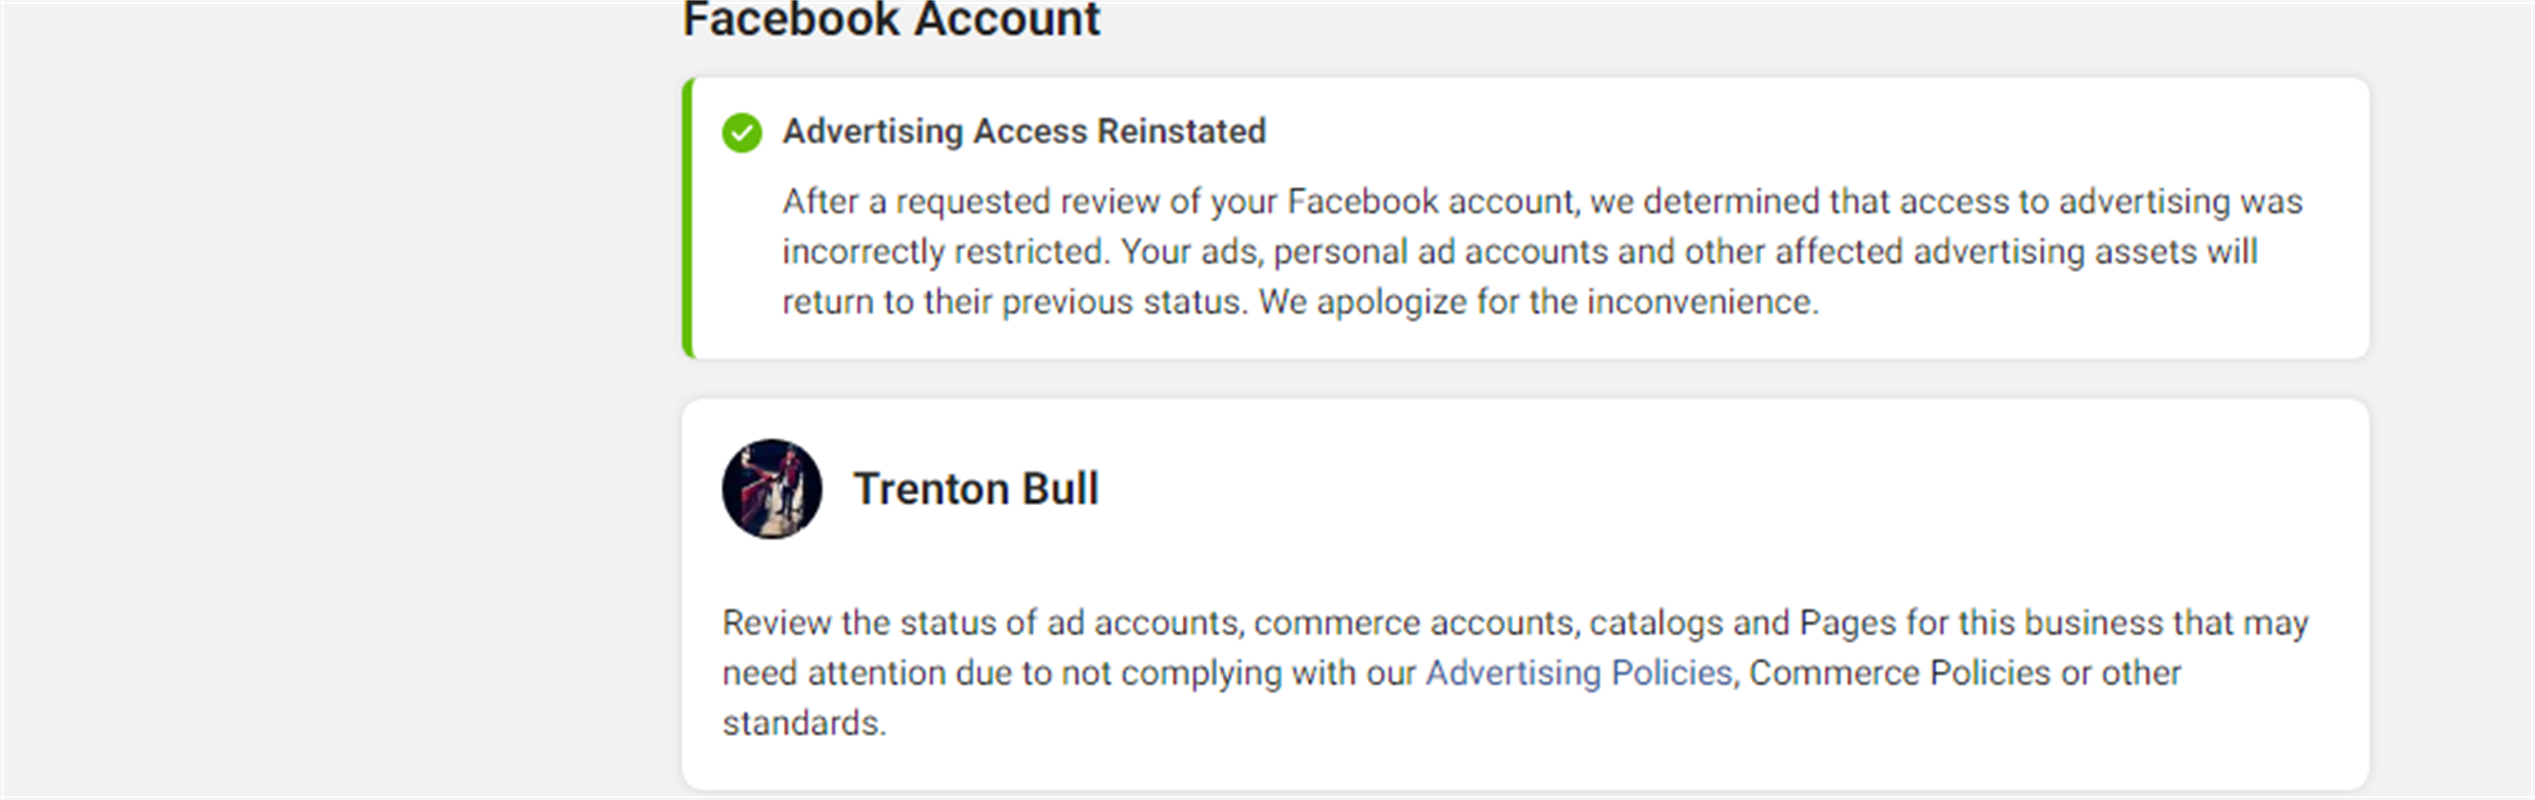 Philippines Facebook Ads Account /  Already resisted link 902/ 2FA / Full mail